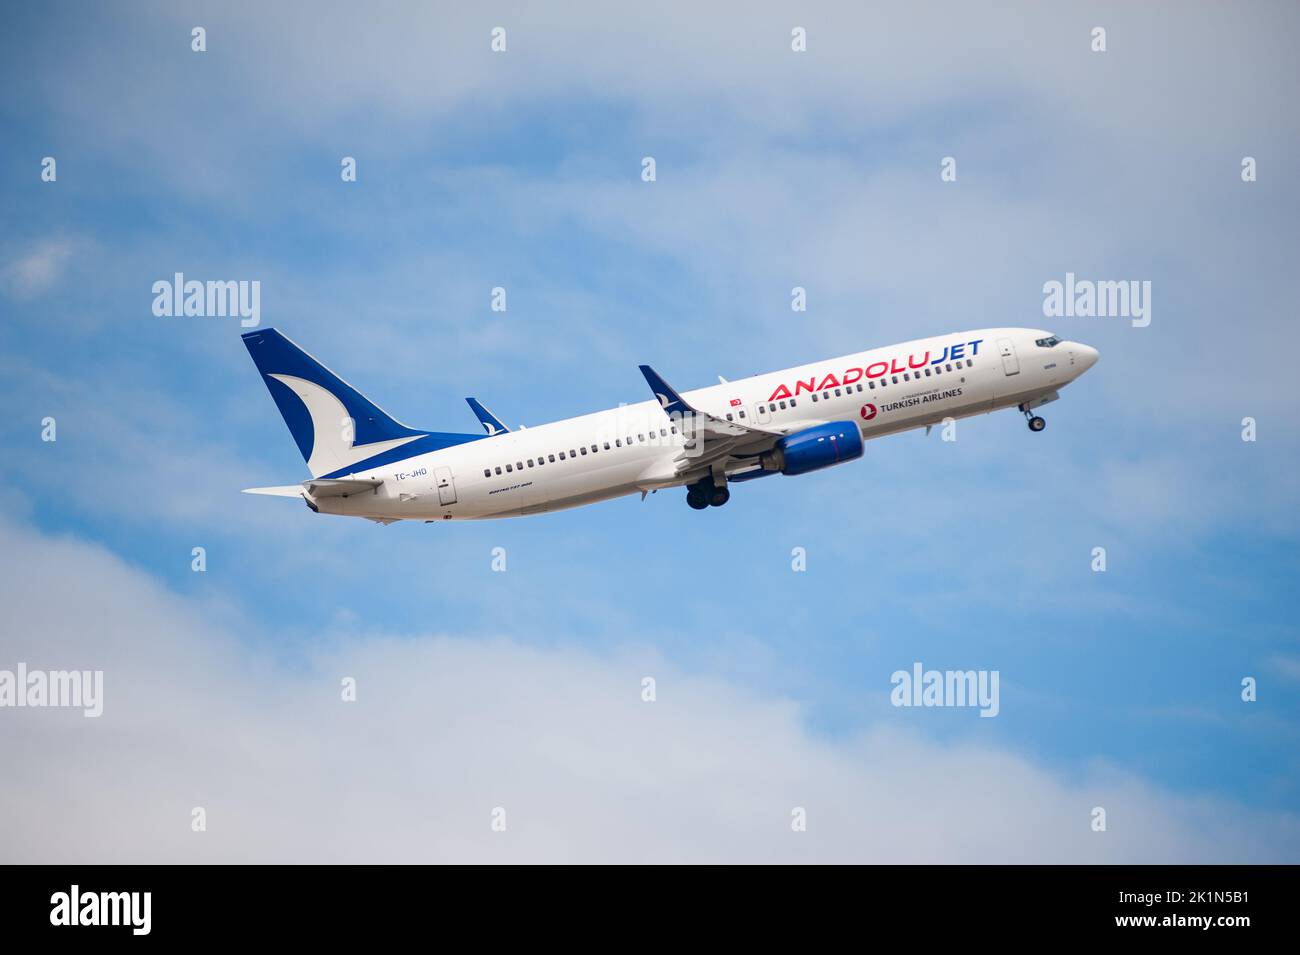 30.08.2022, Berlin, Germany, Europe - An AnadoluJet Boeing 737-800 passenger aircraft takes off from Berlin Brandenburg Airport BER. Stock Photo